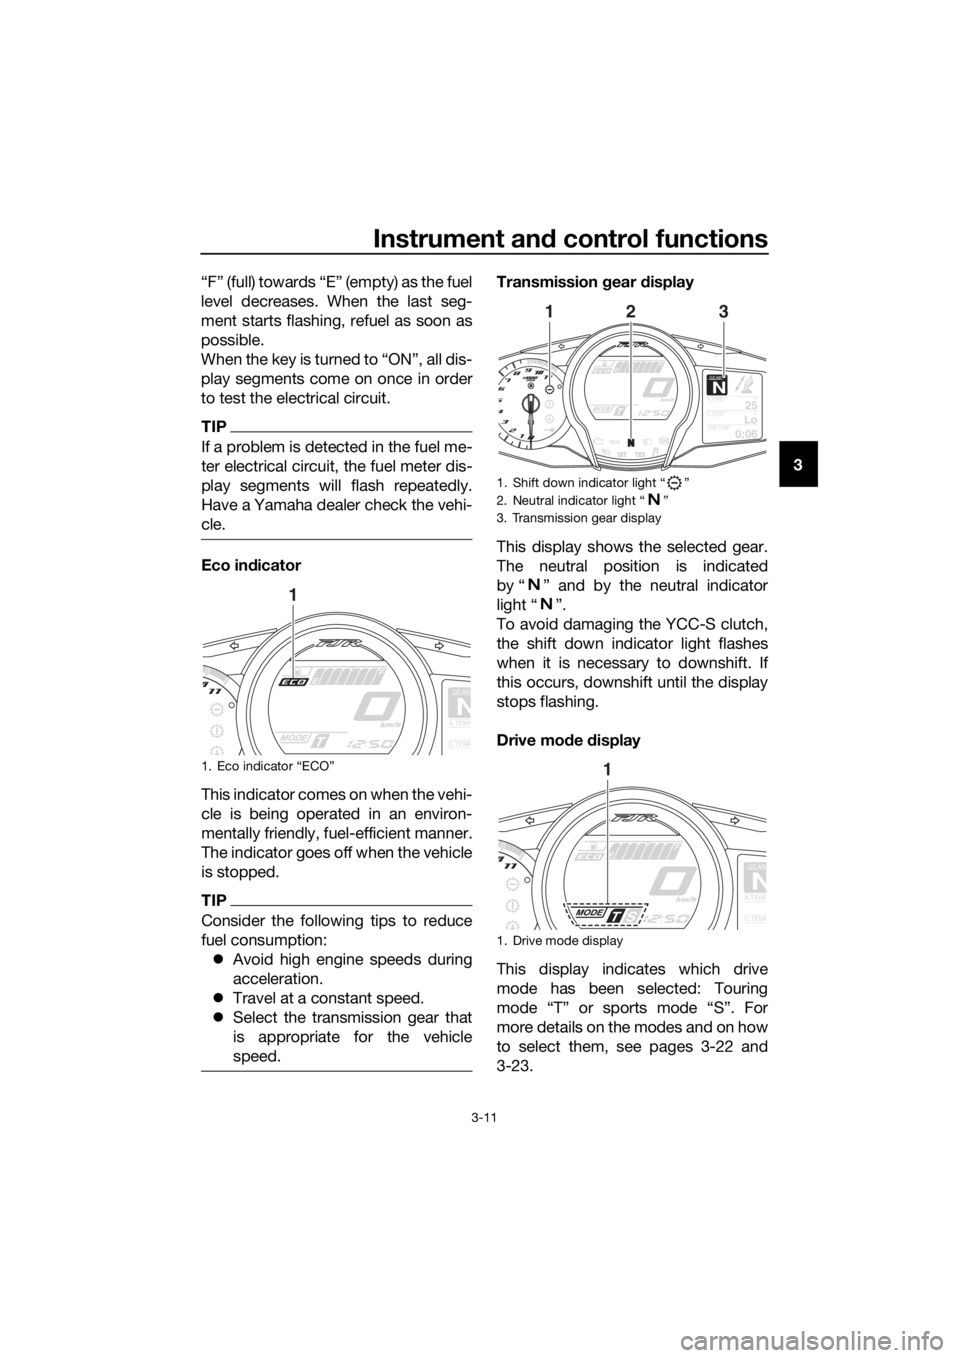 YAMAHA FJR1300AS 2020  Owners Manual Instrument and control functions
3-11
3
“F” (full) towards “E” (empty) as the fuel
level decreases. When the last seg-
ment starts flashing, refuel as soon as
possible.
When the key is turned 